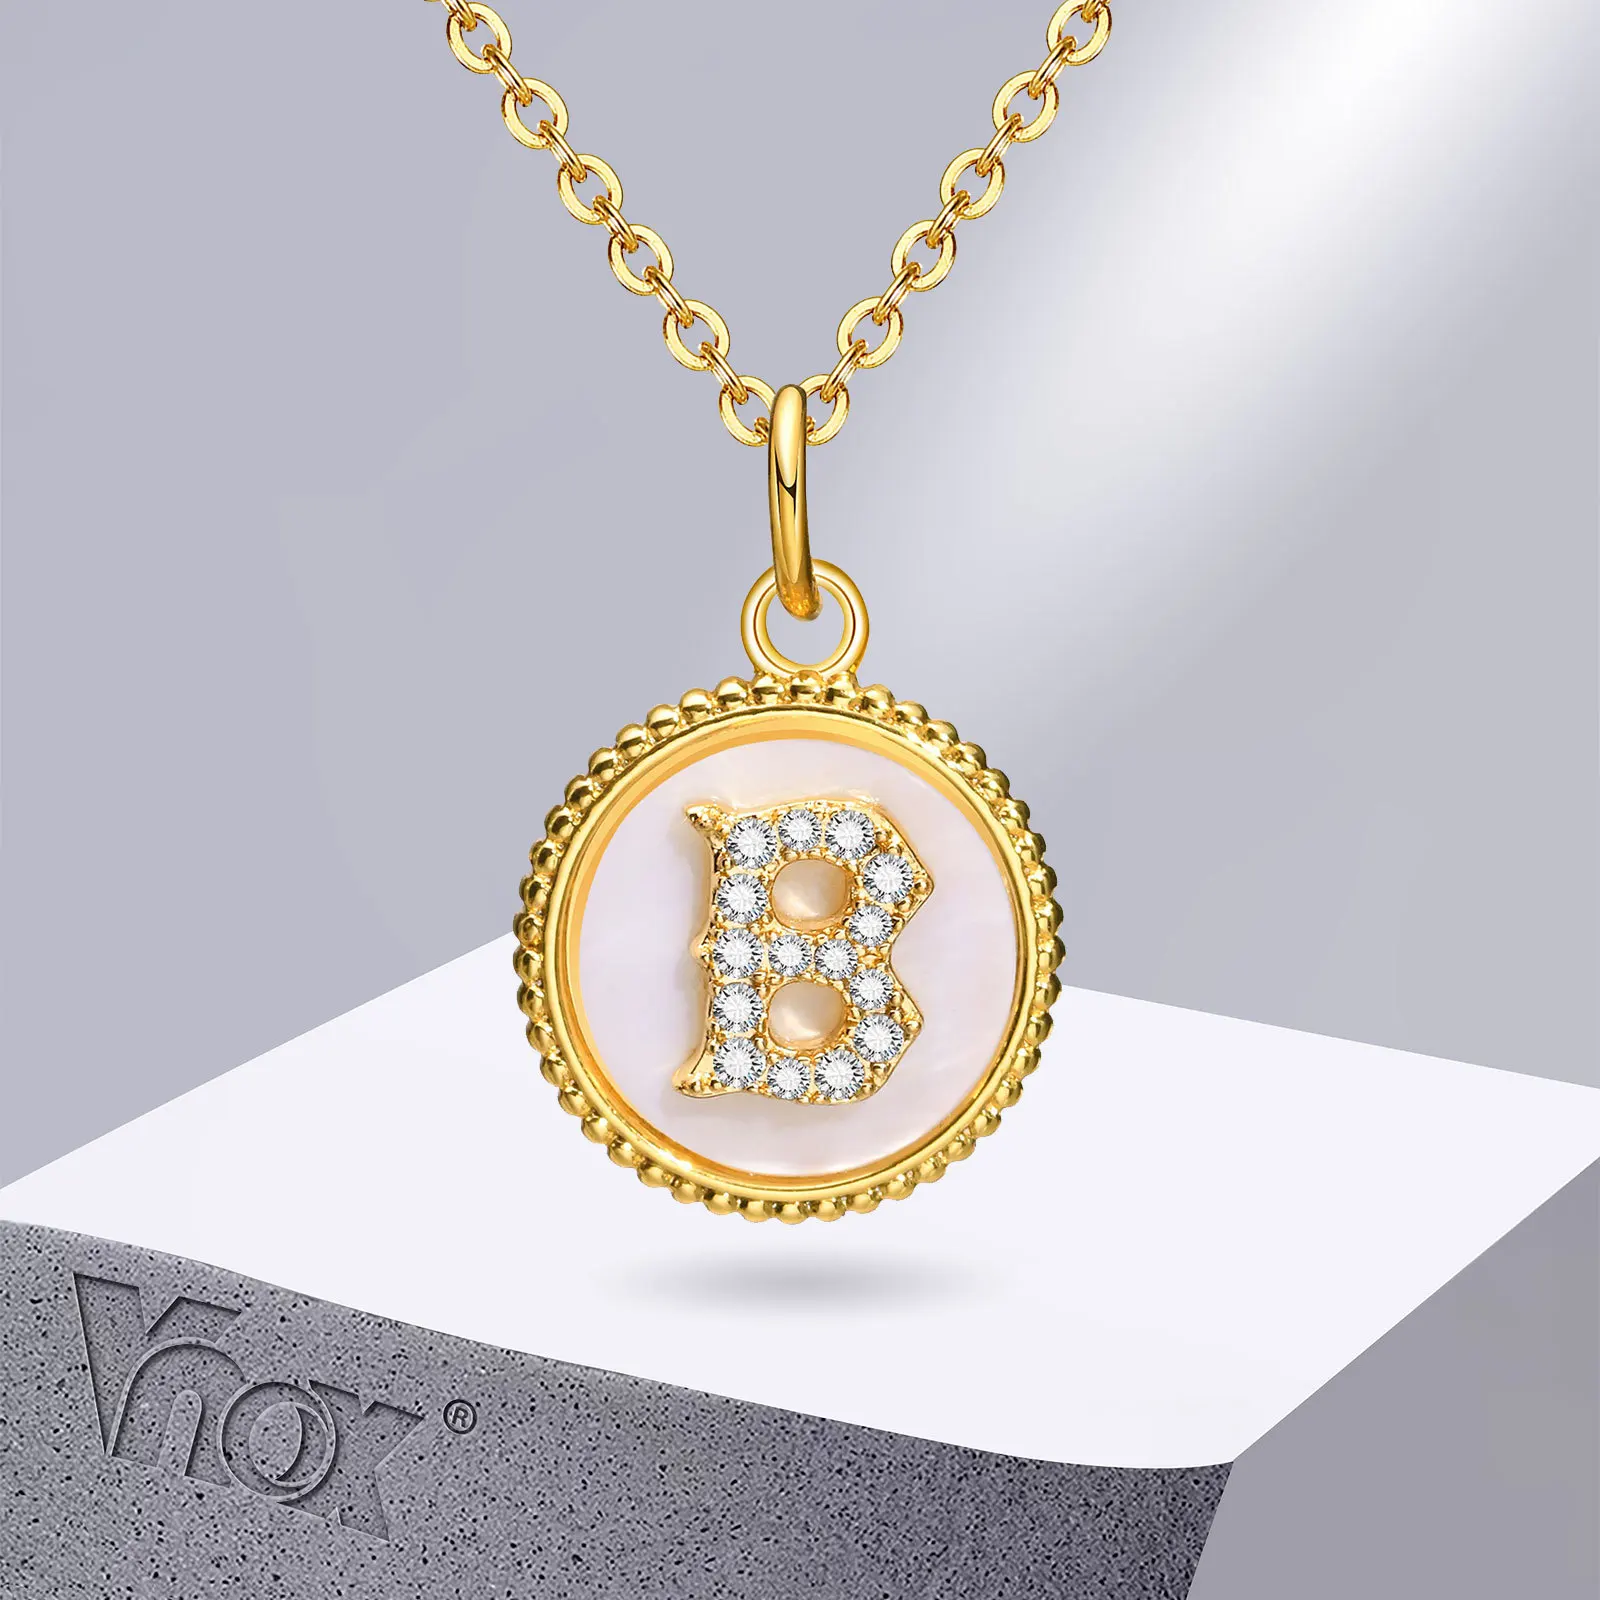 

Vnox Women Initial Necklaces, Shell Coin Pendant with Bling CZ Stone 26 Letters, Shiny Elegant Dainty Girls Collar